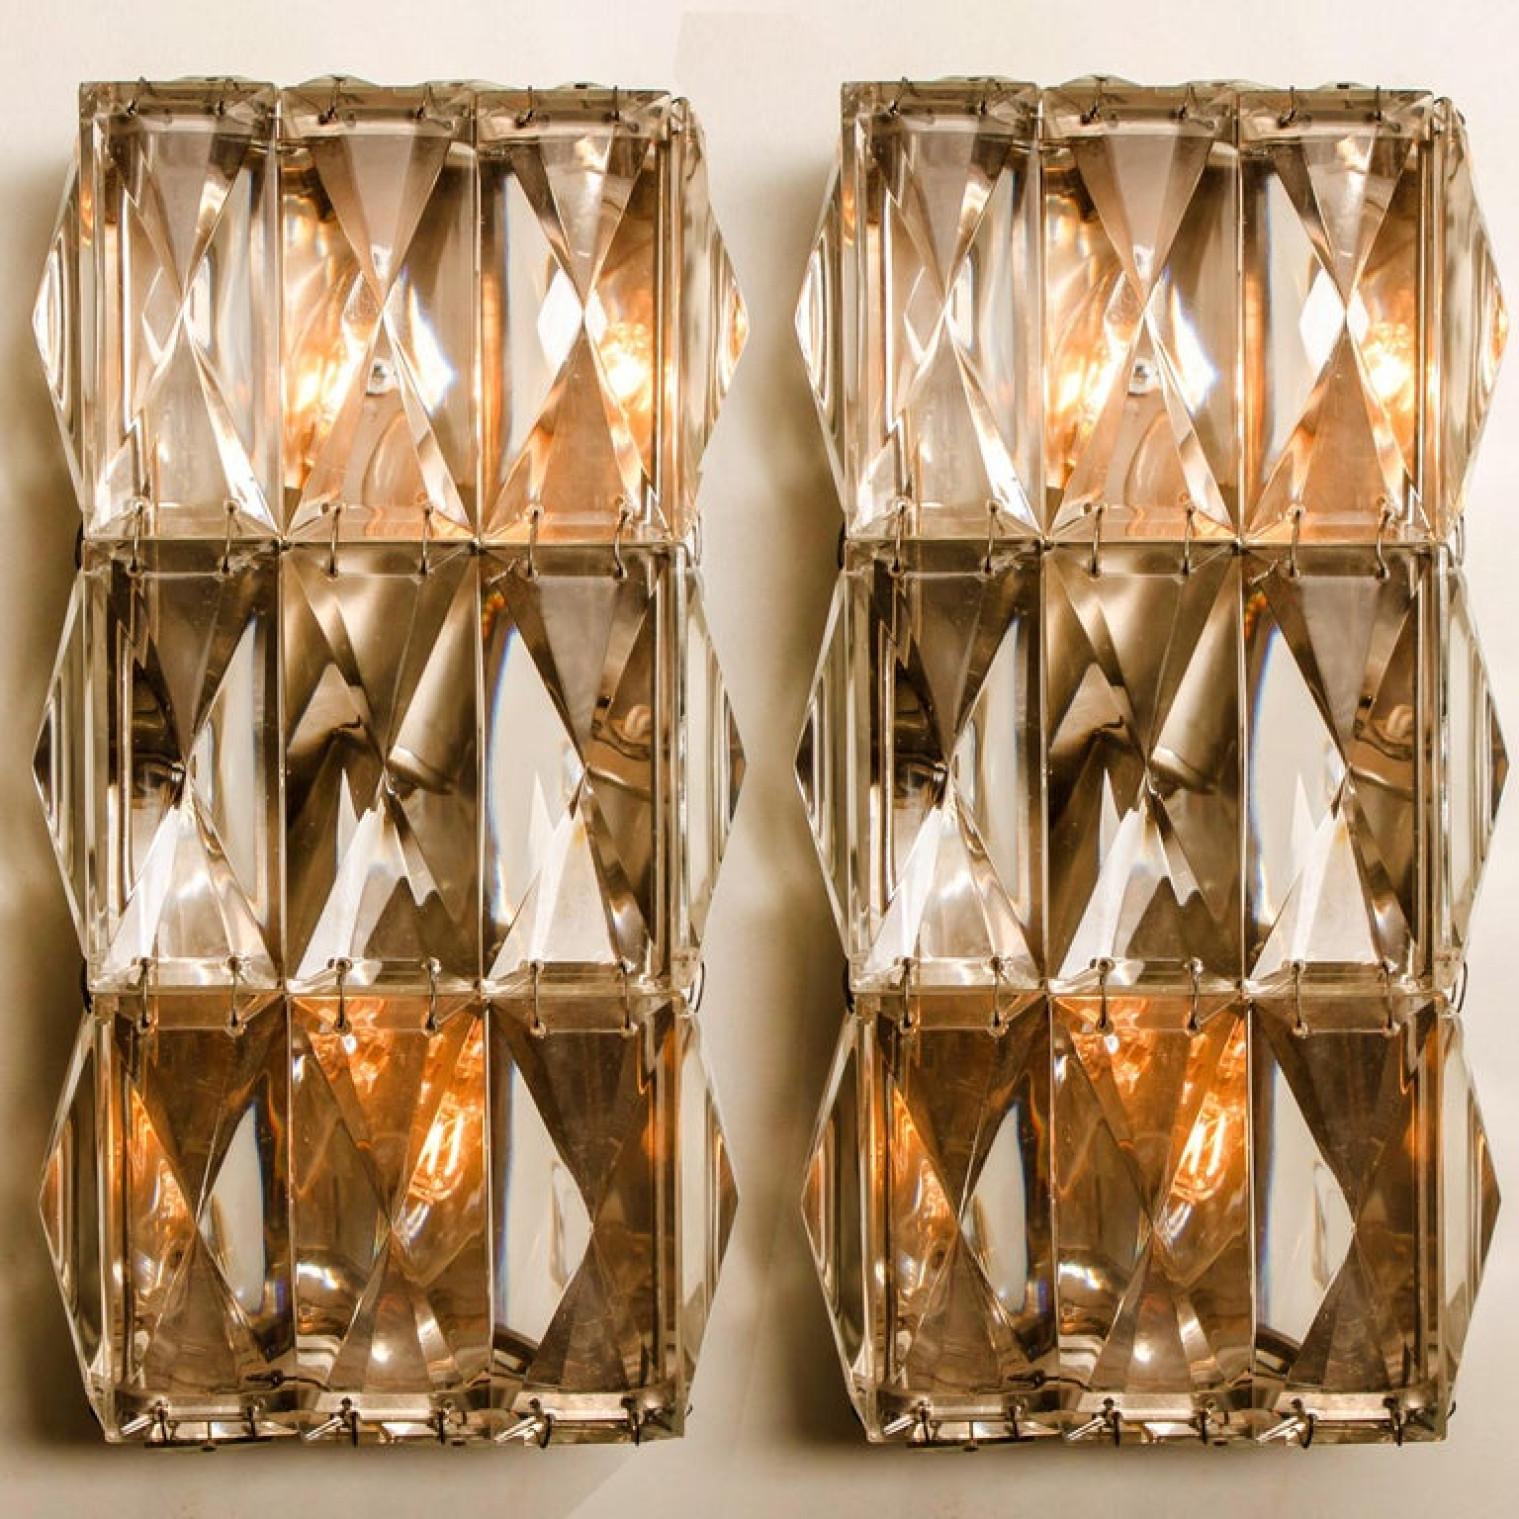 Mid-Century Modern Pair of Palwa Wall Light Fixtures, Chrome-Plated Crystal Glass, 1970 For Sale